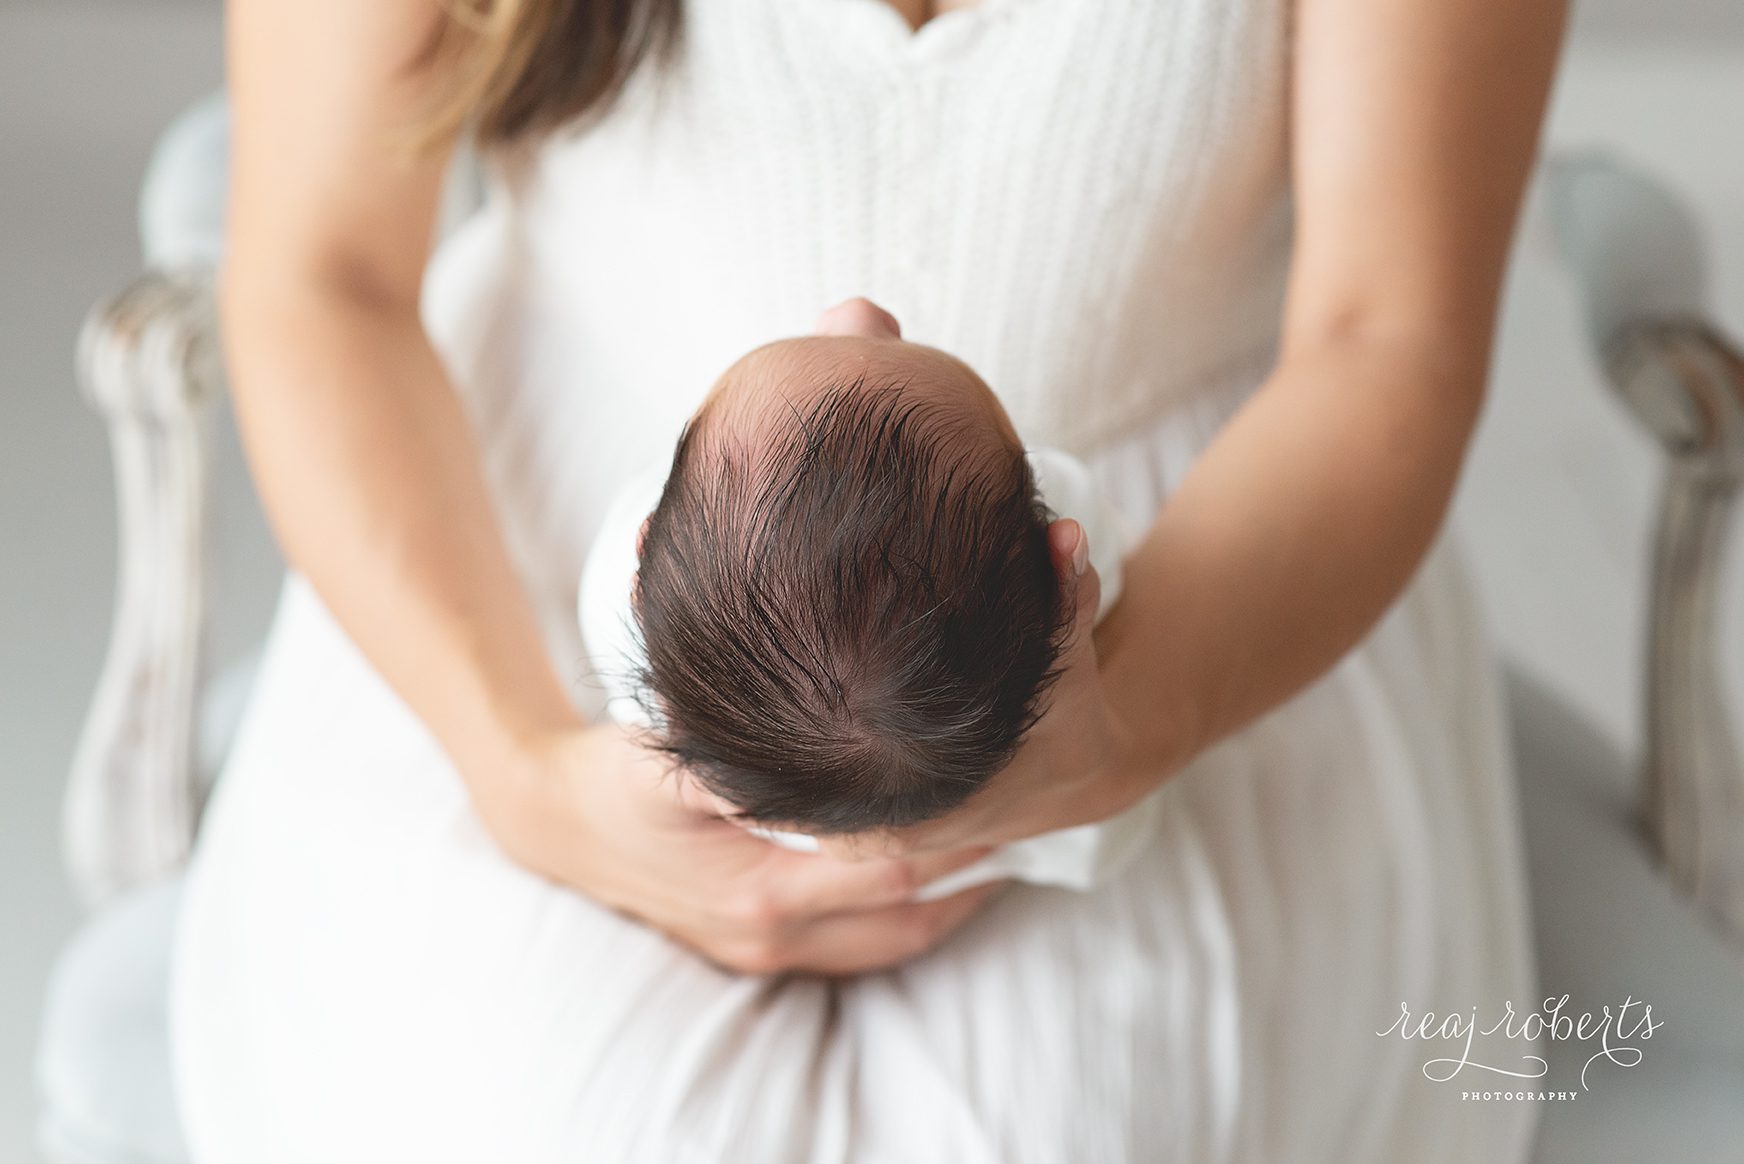 simple newborn photo ideas with mom holding baby | Reaj Roberts Photography